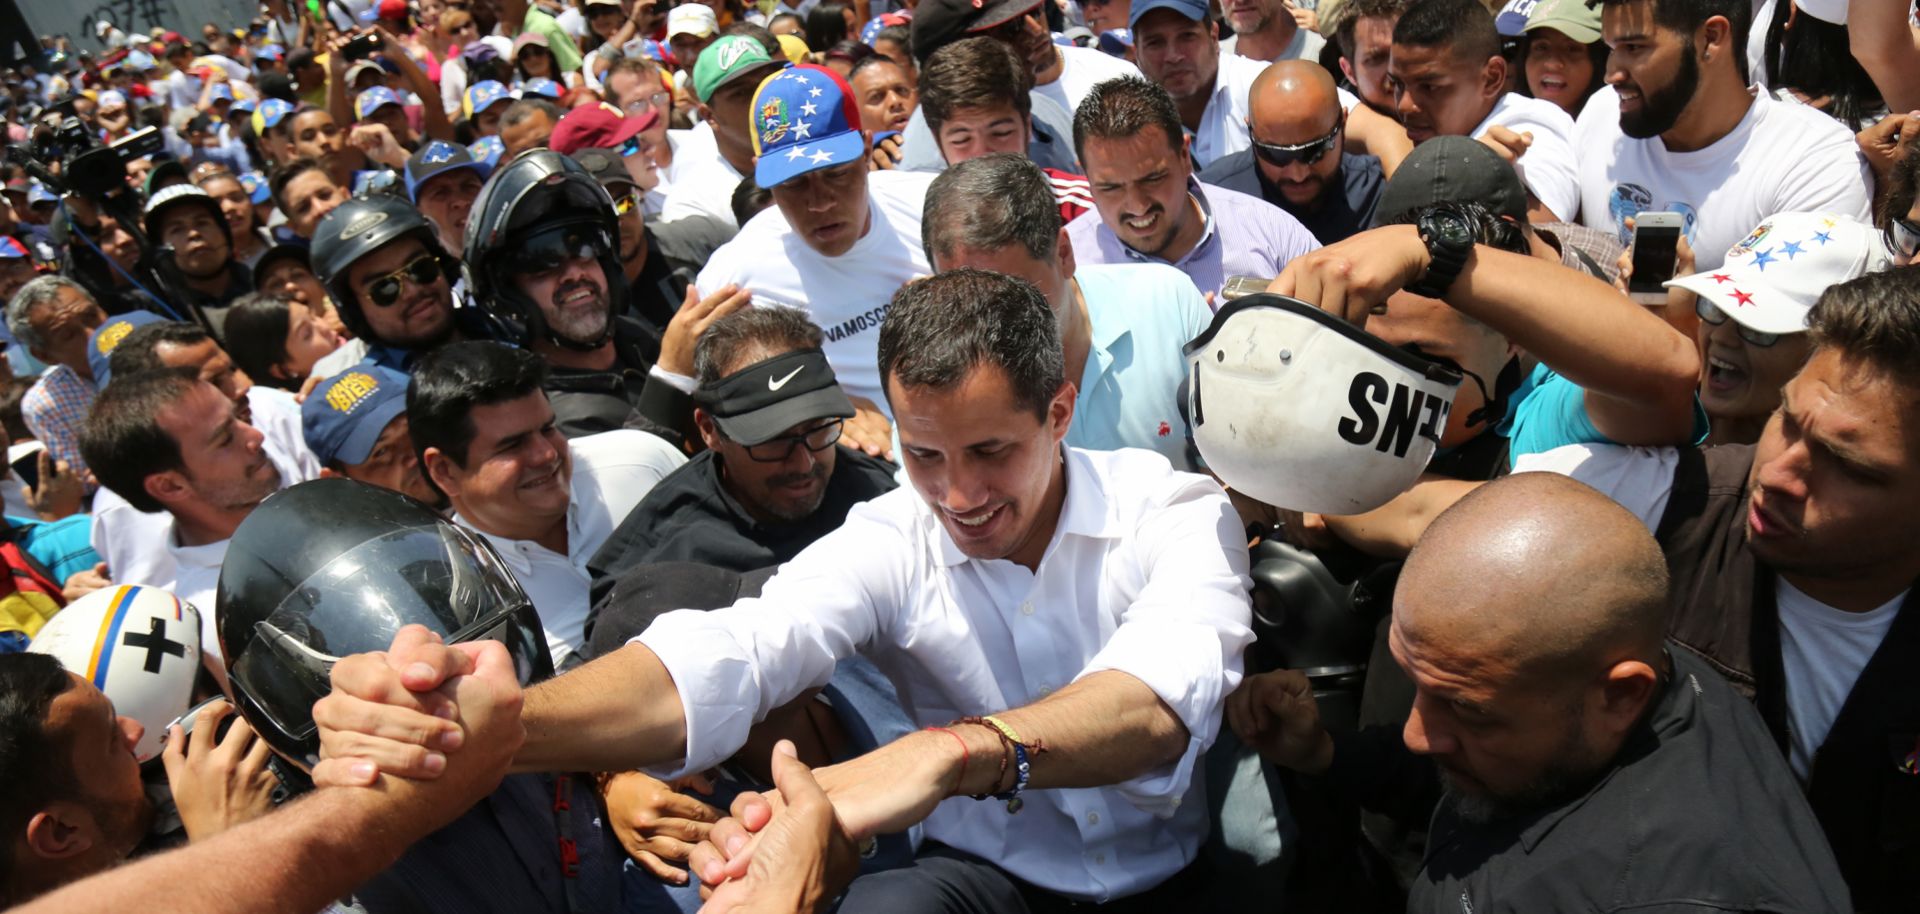 Juan Guaido, leader of the political opposition movement in Venezuela, greets supporters at a demonstration on May 1, 2019.